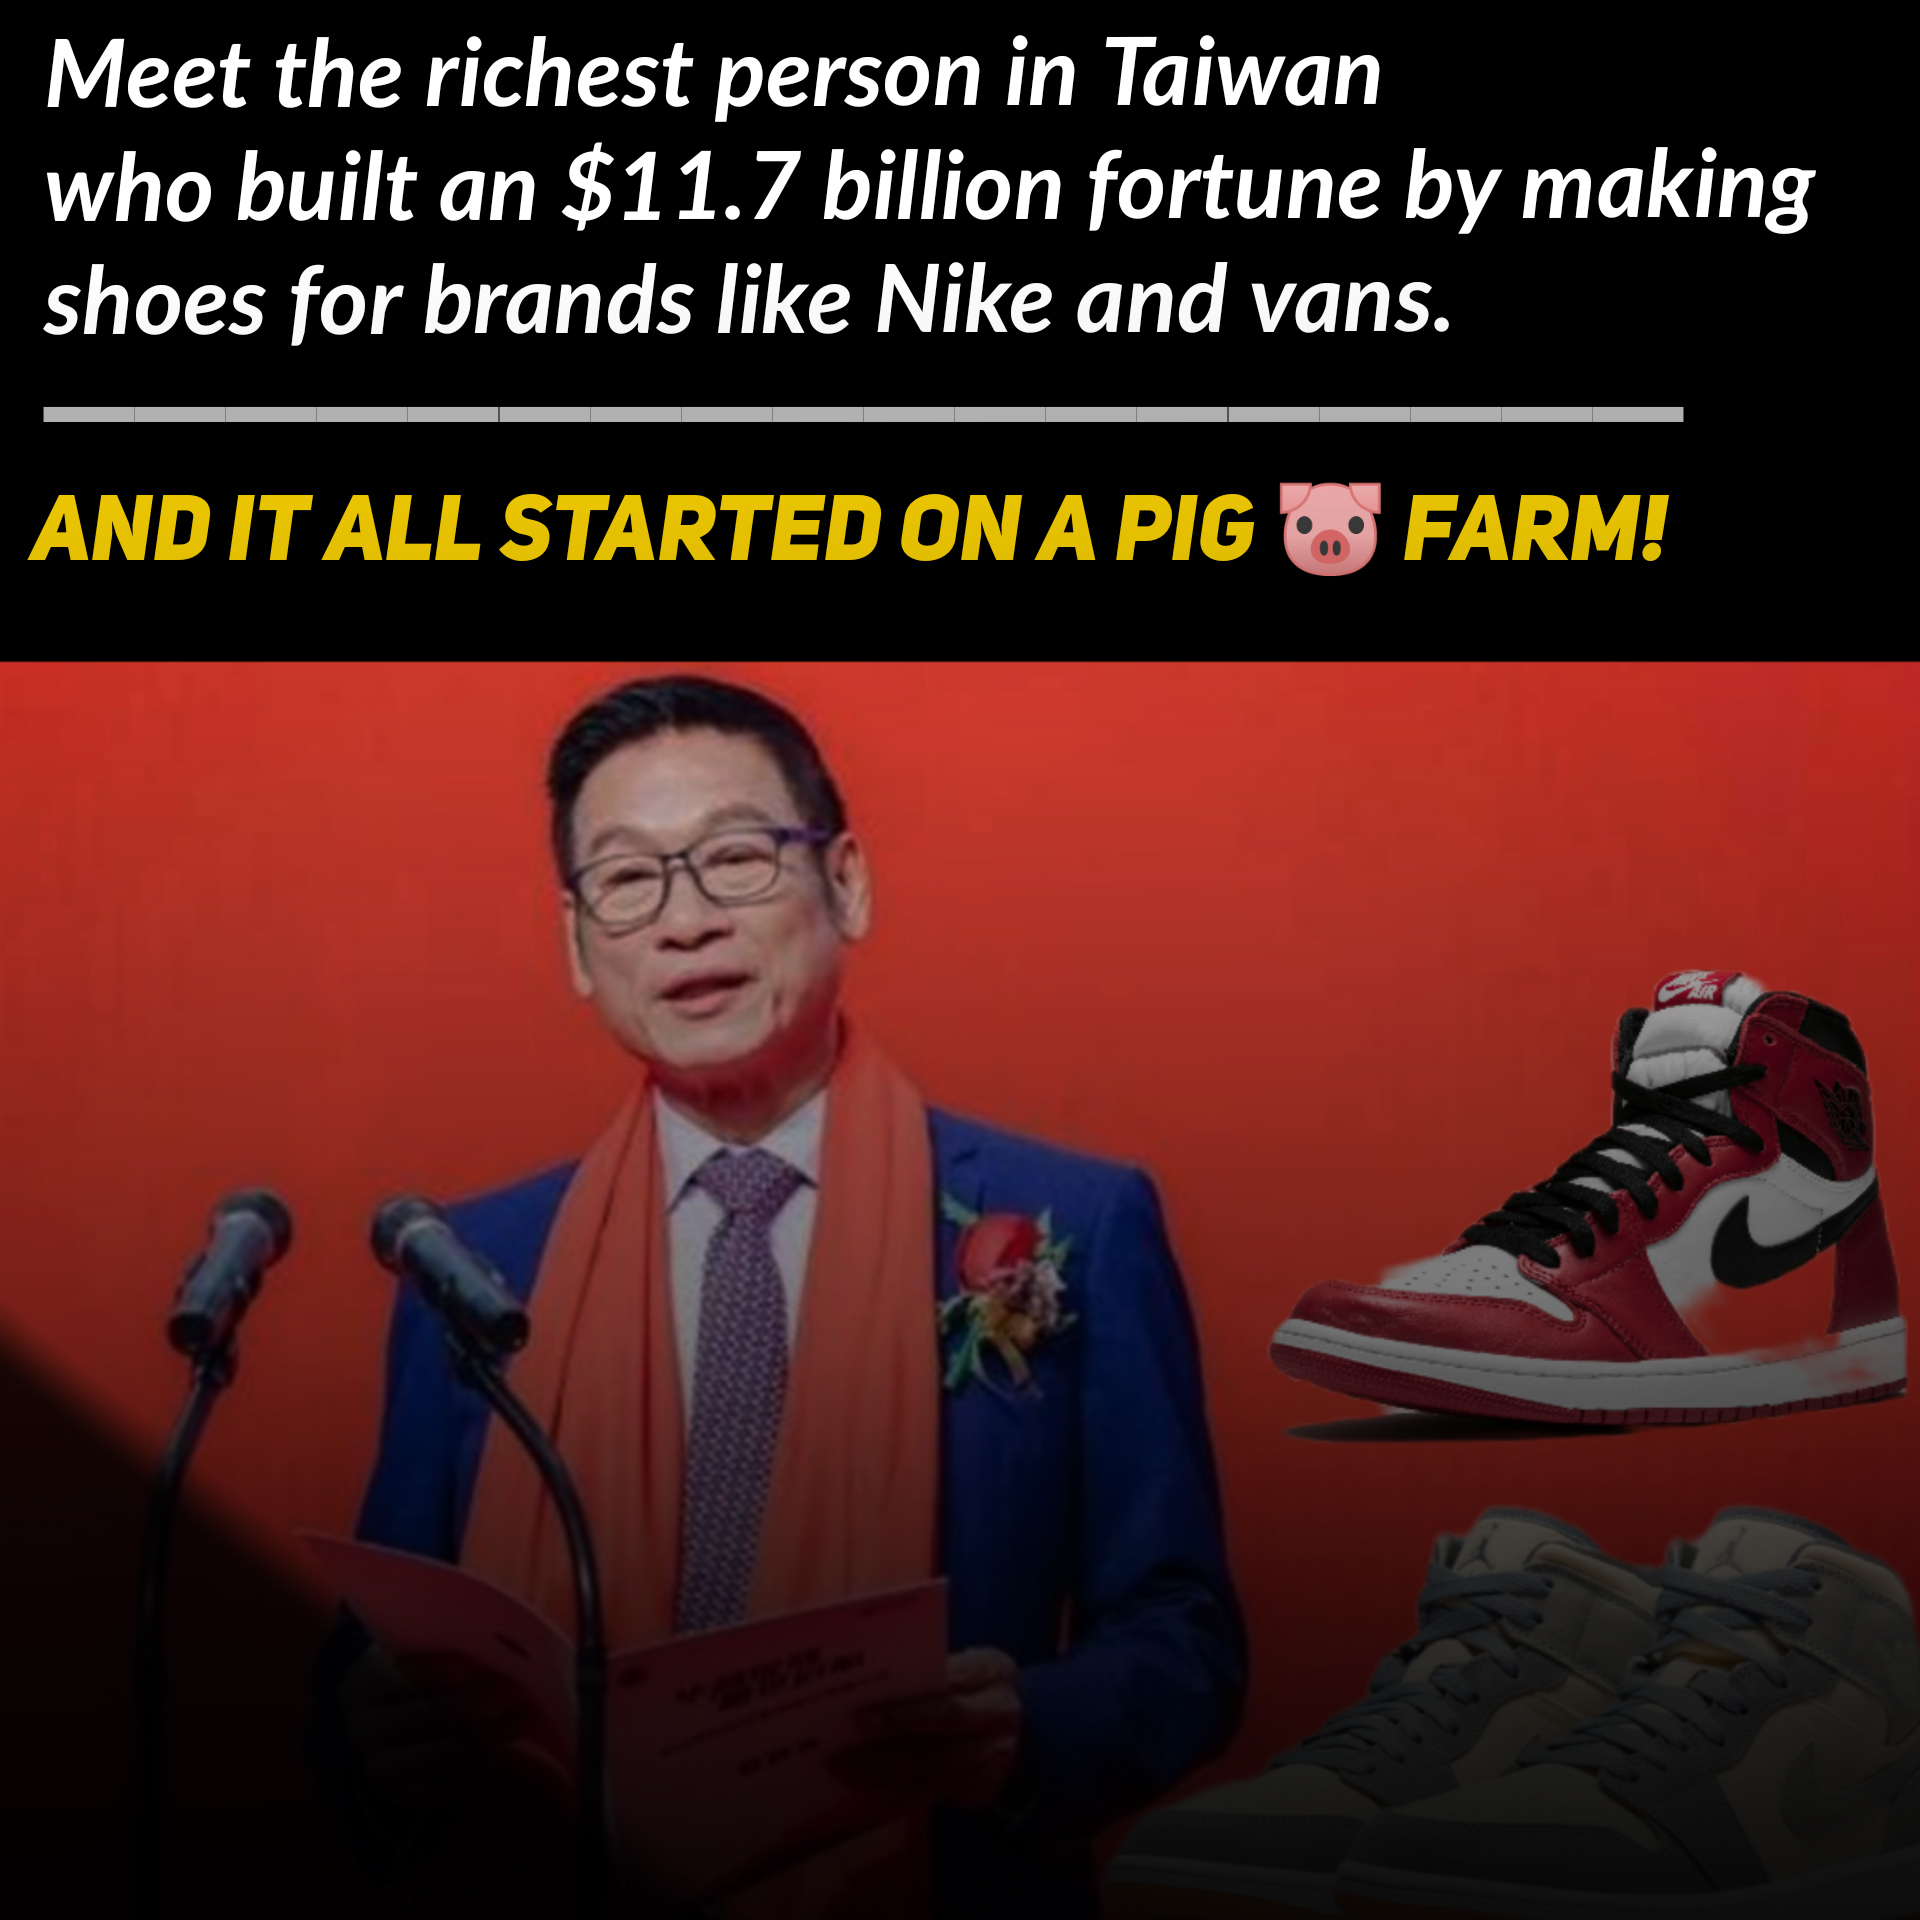 Meet the richest person in Taiwan who started his startups on a pig farm